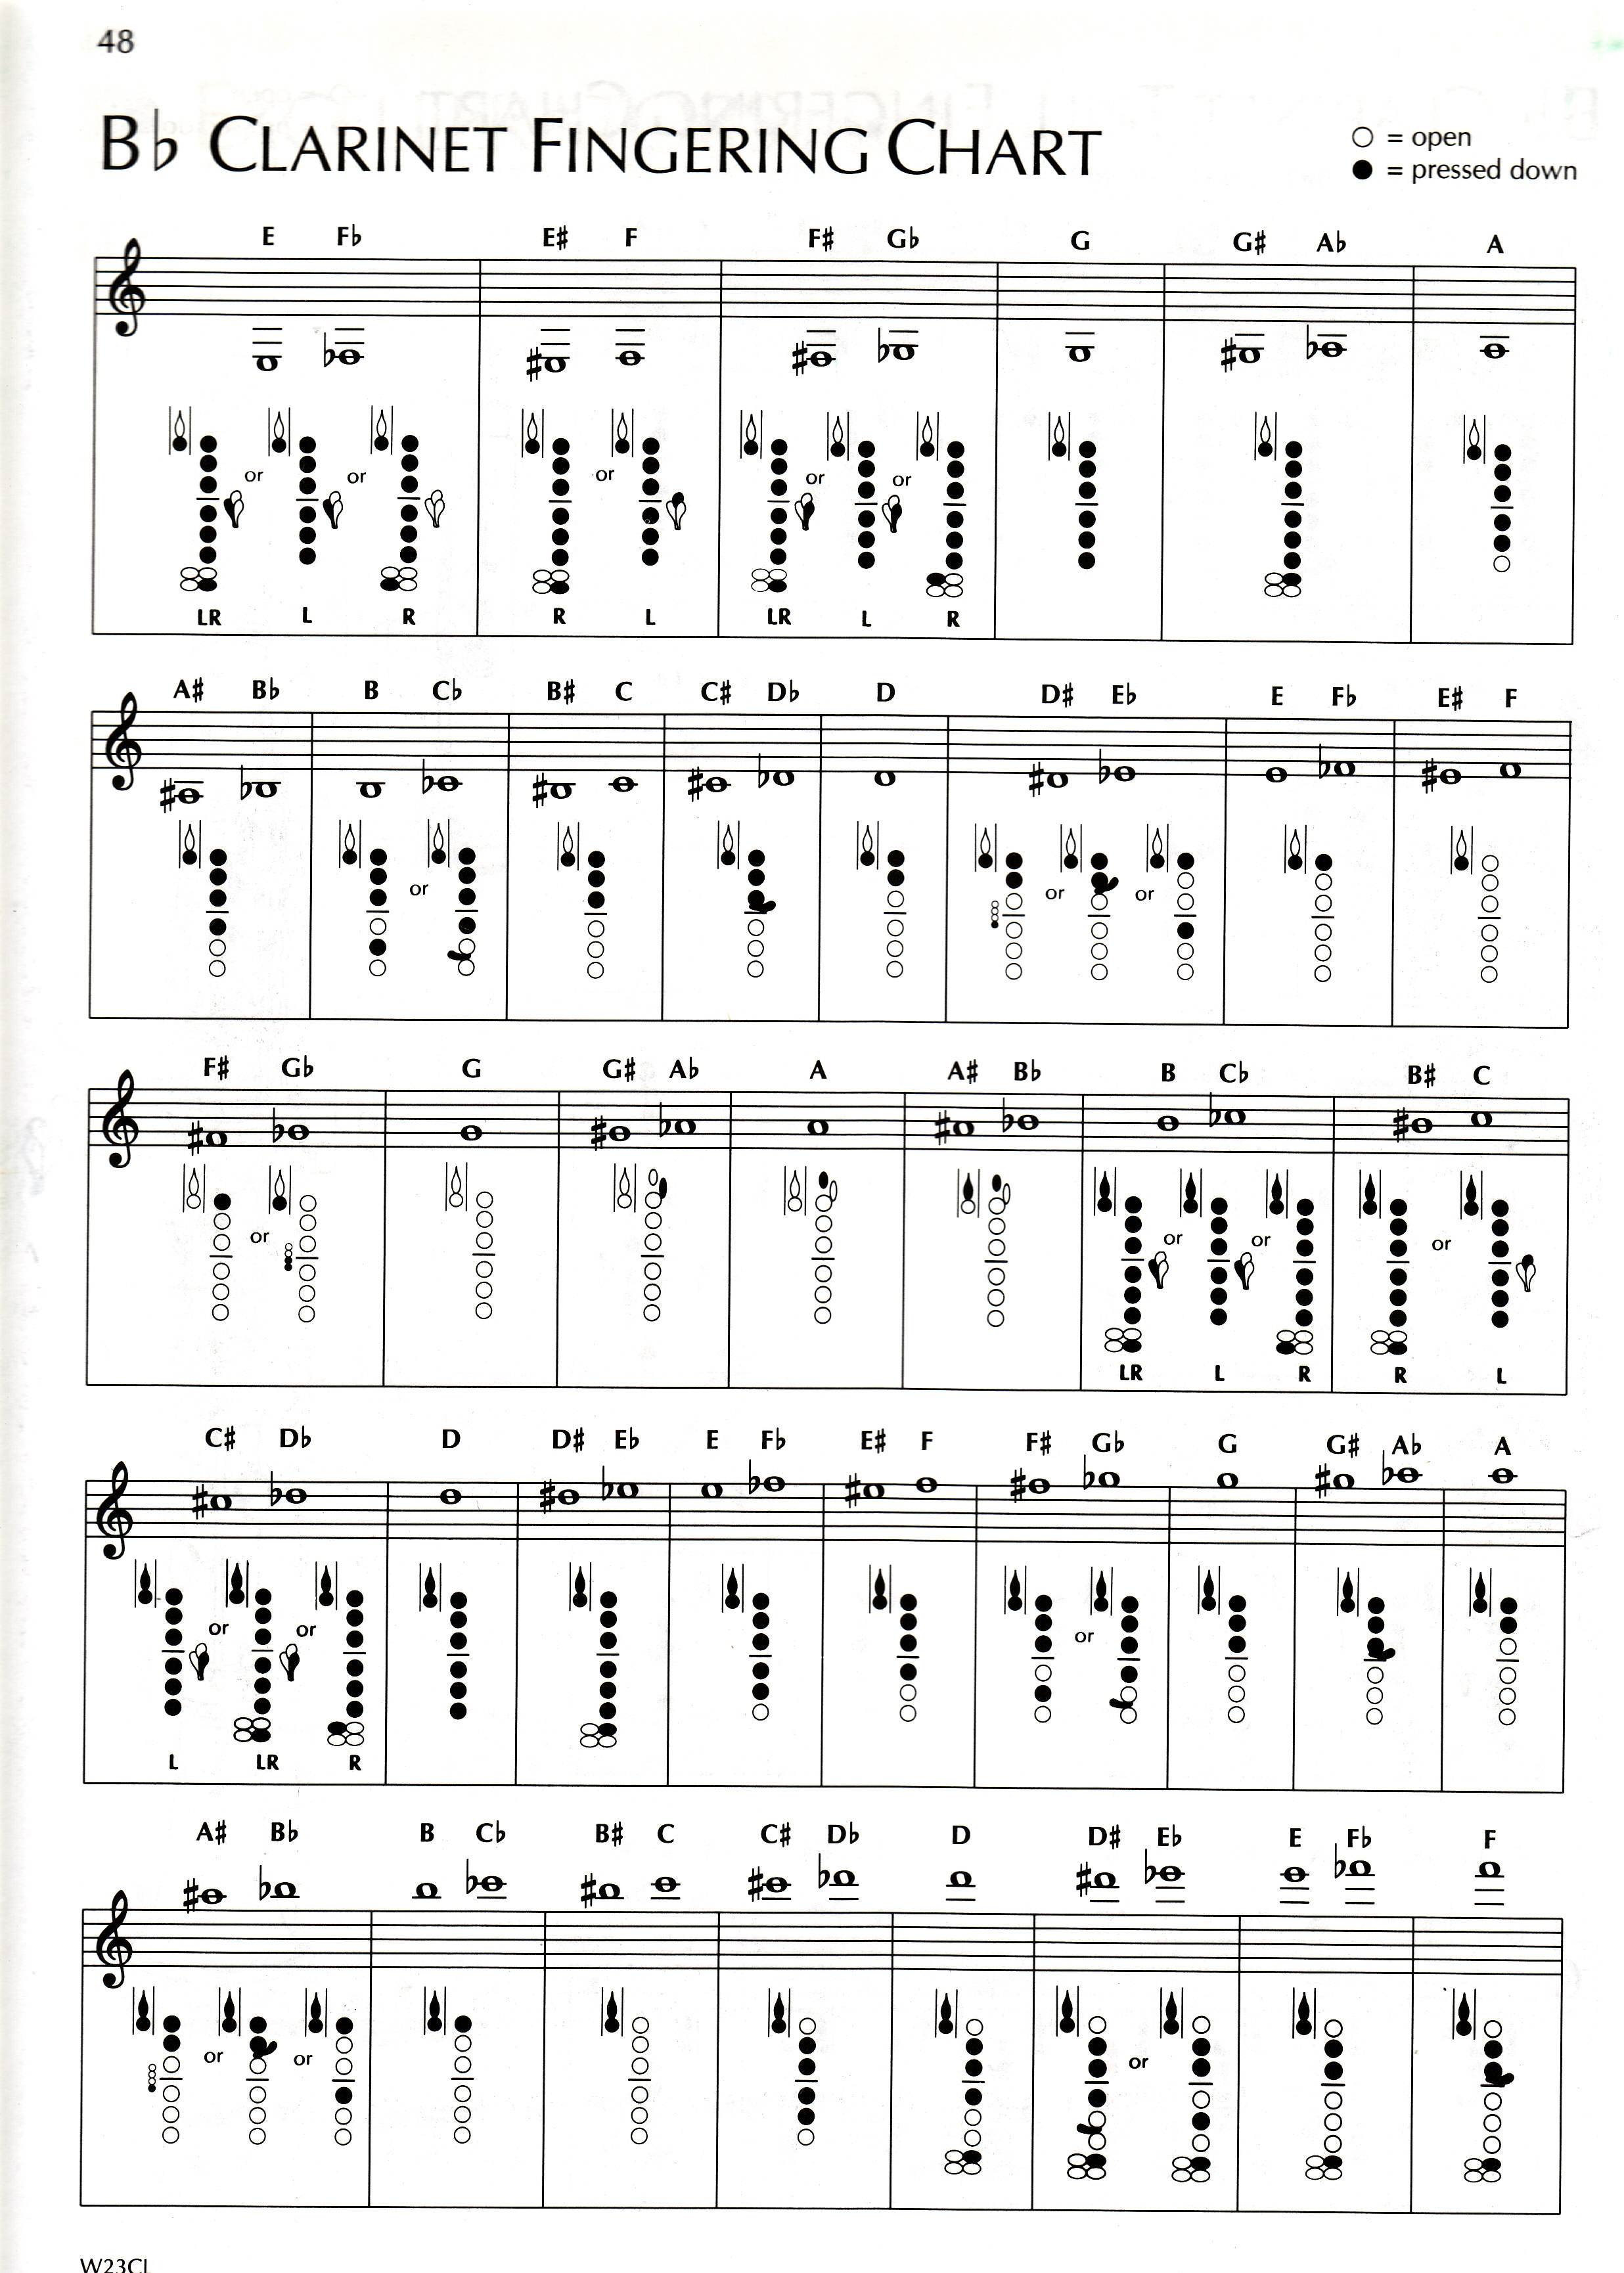 instrument-fingering-charts-guy-b-brown-music